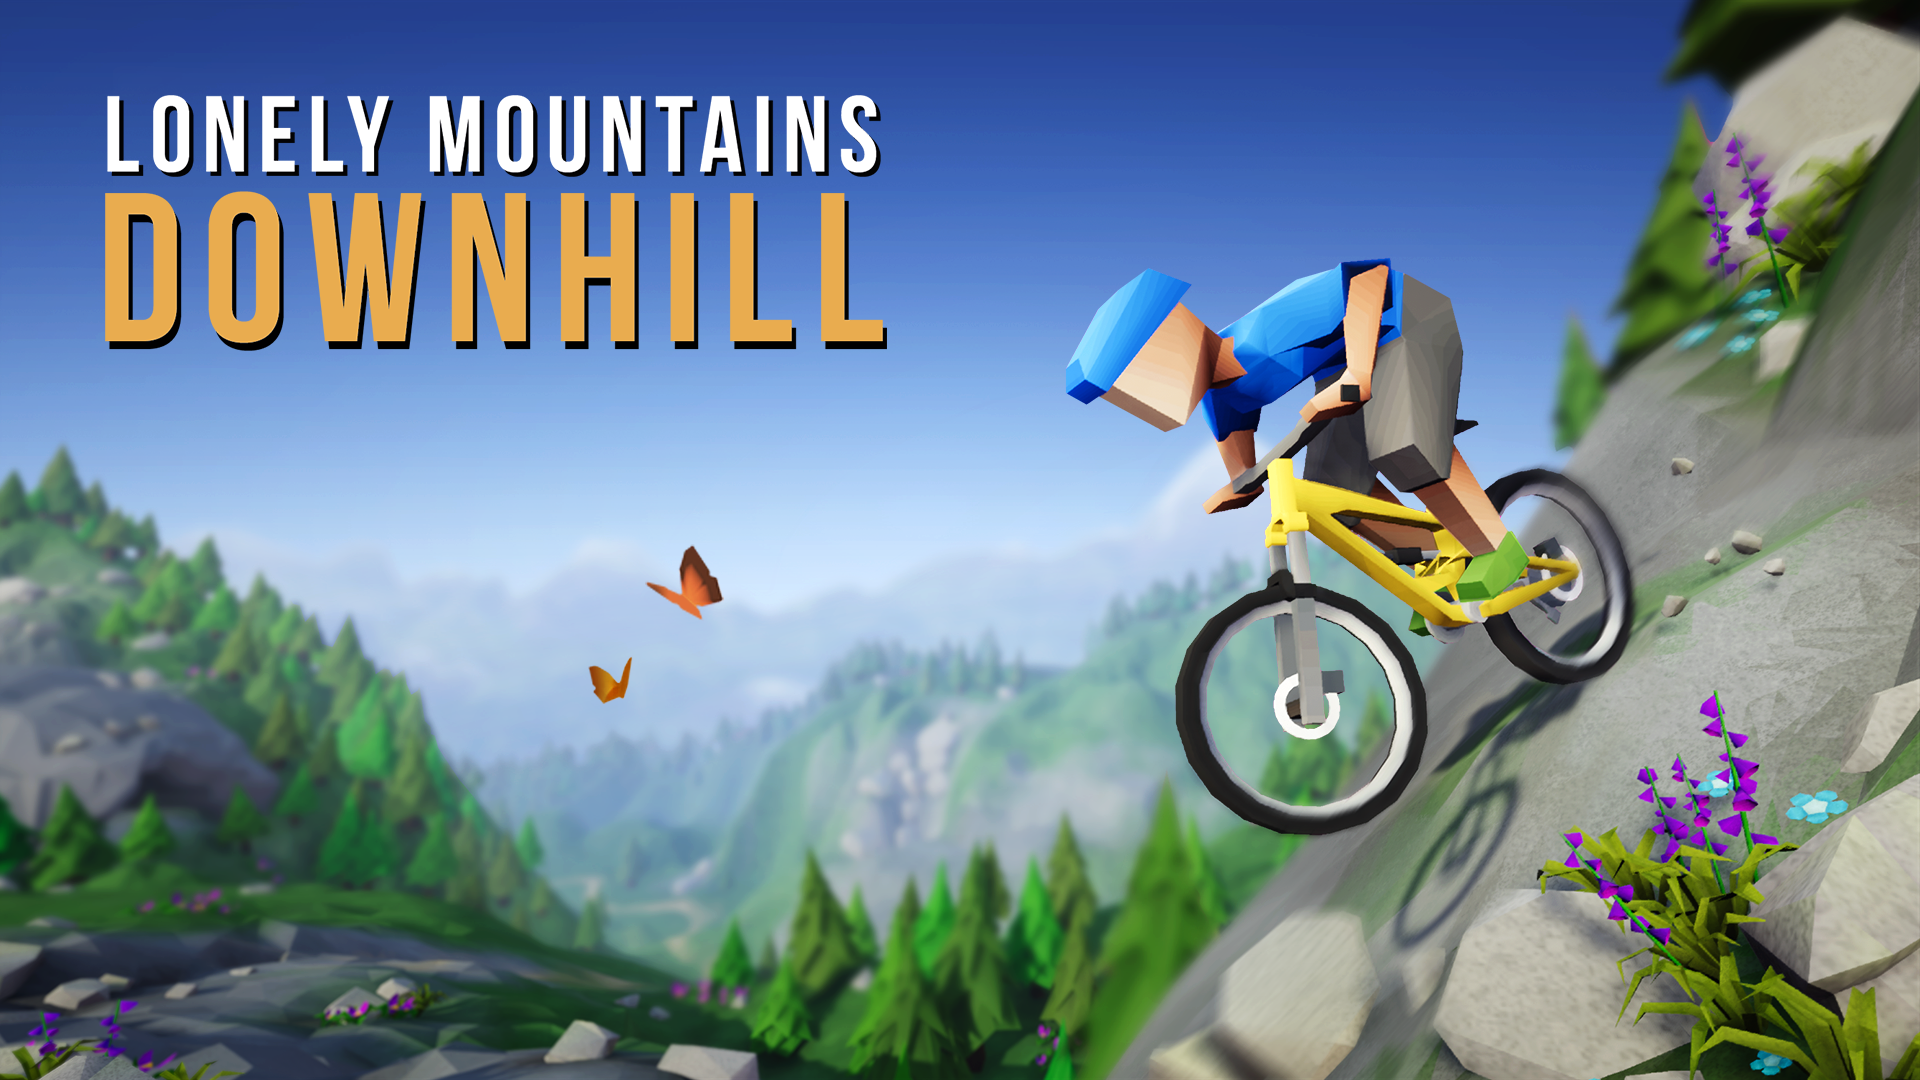 AMA Mountain Biking Game Lonely Mountains: Downhill is coming to PS4 after 4 years of Development